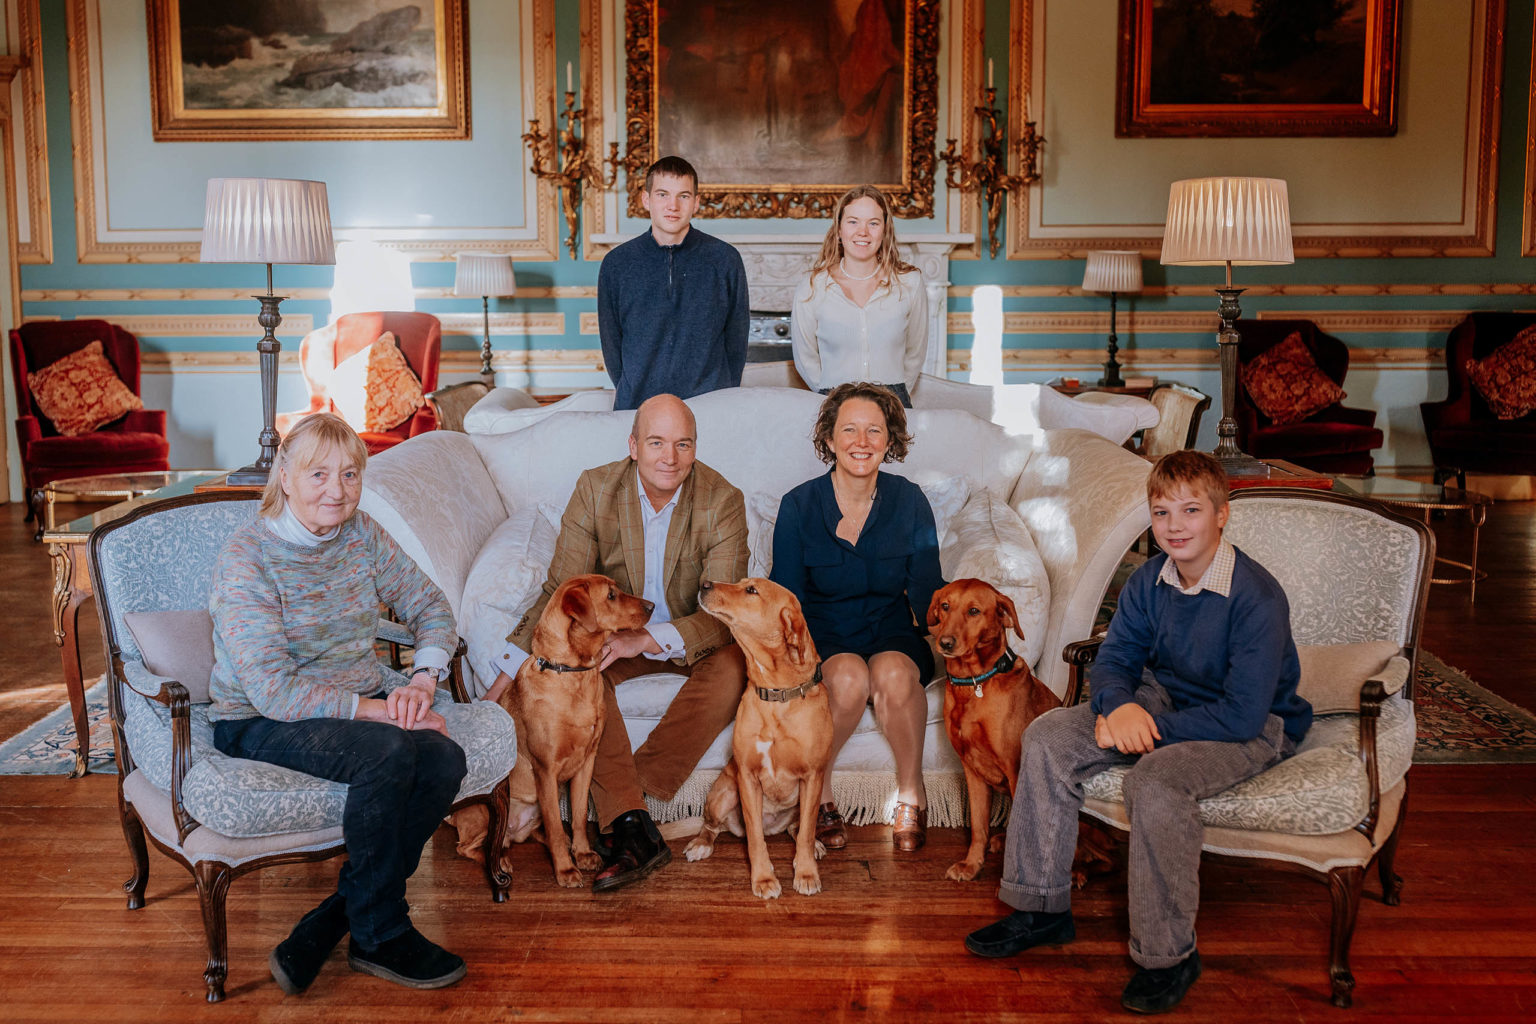 A modern photo of the Cunliffe-Lister family